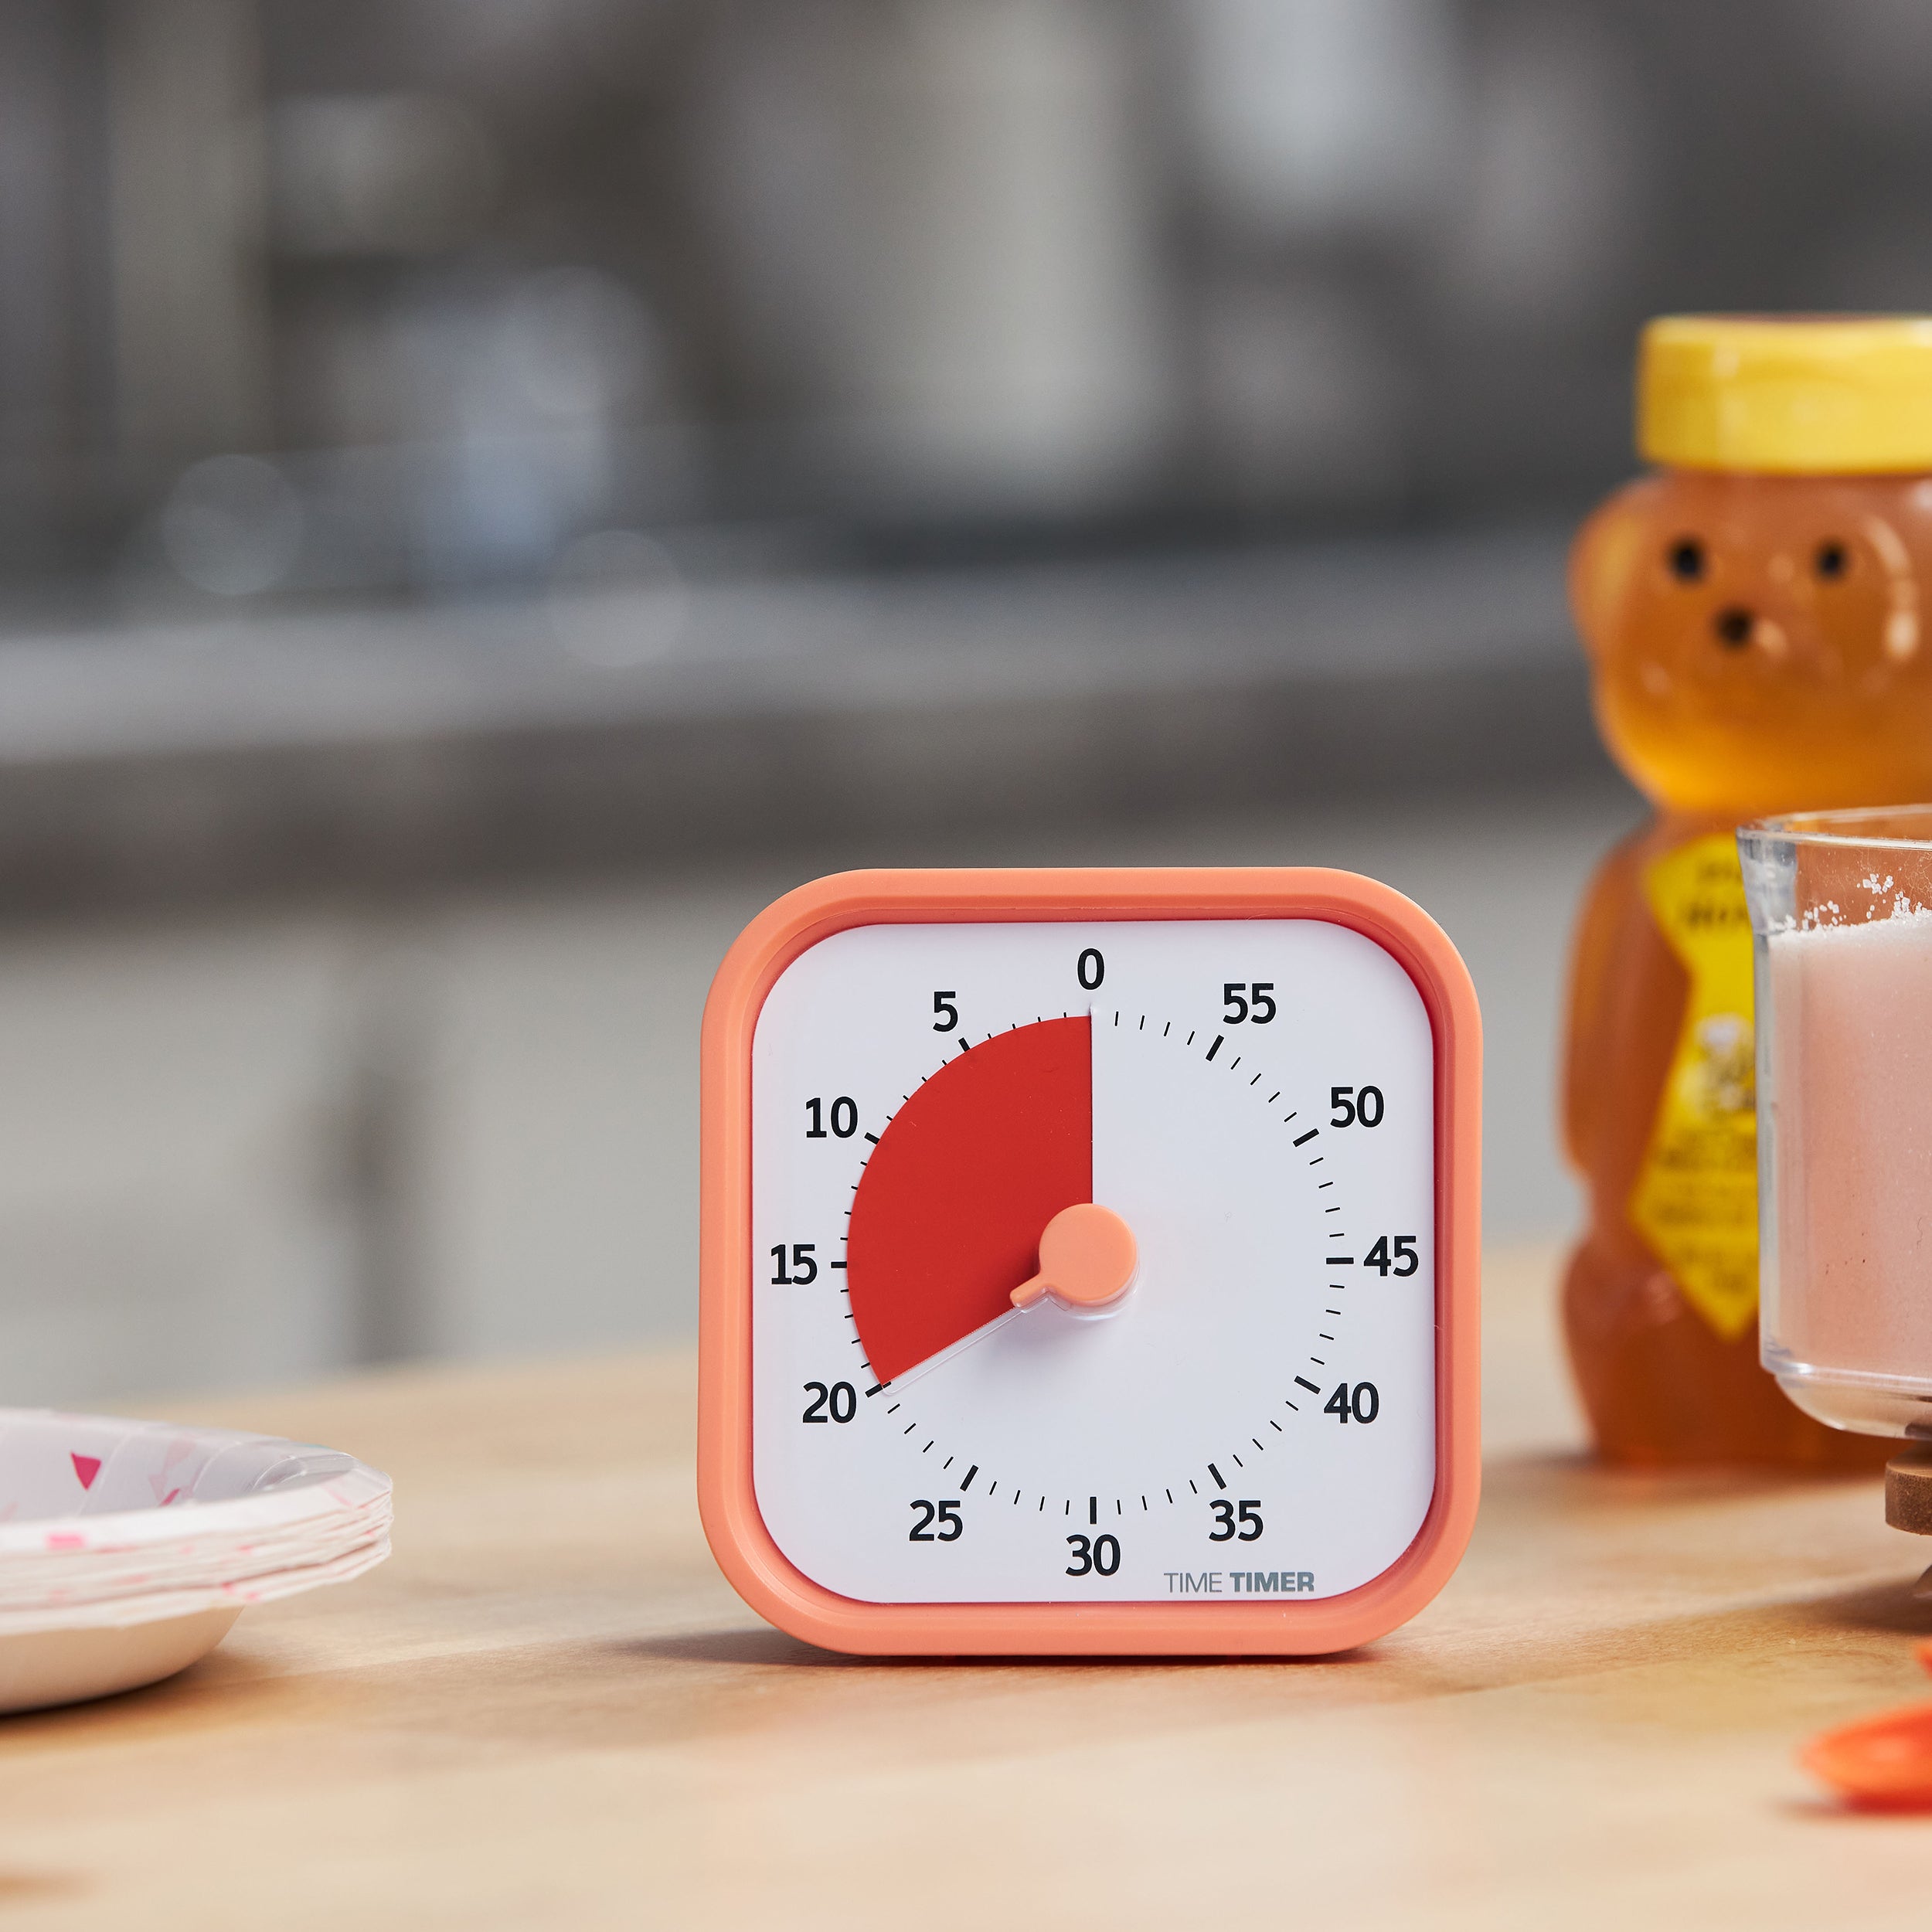 Time Timer MOD - Home Edition - This energetic visual timer is pictured on a kitchen table with a bear-shaped container of honey and some fun paper plates in the background. This is the Dreamsicle Orange color and has a sherbert colored exterior with a saturated orange colored disk that disappears as time elapses.